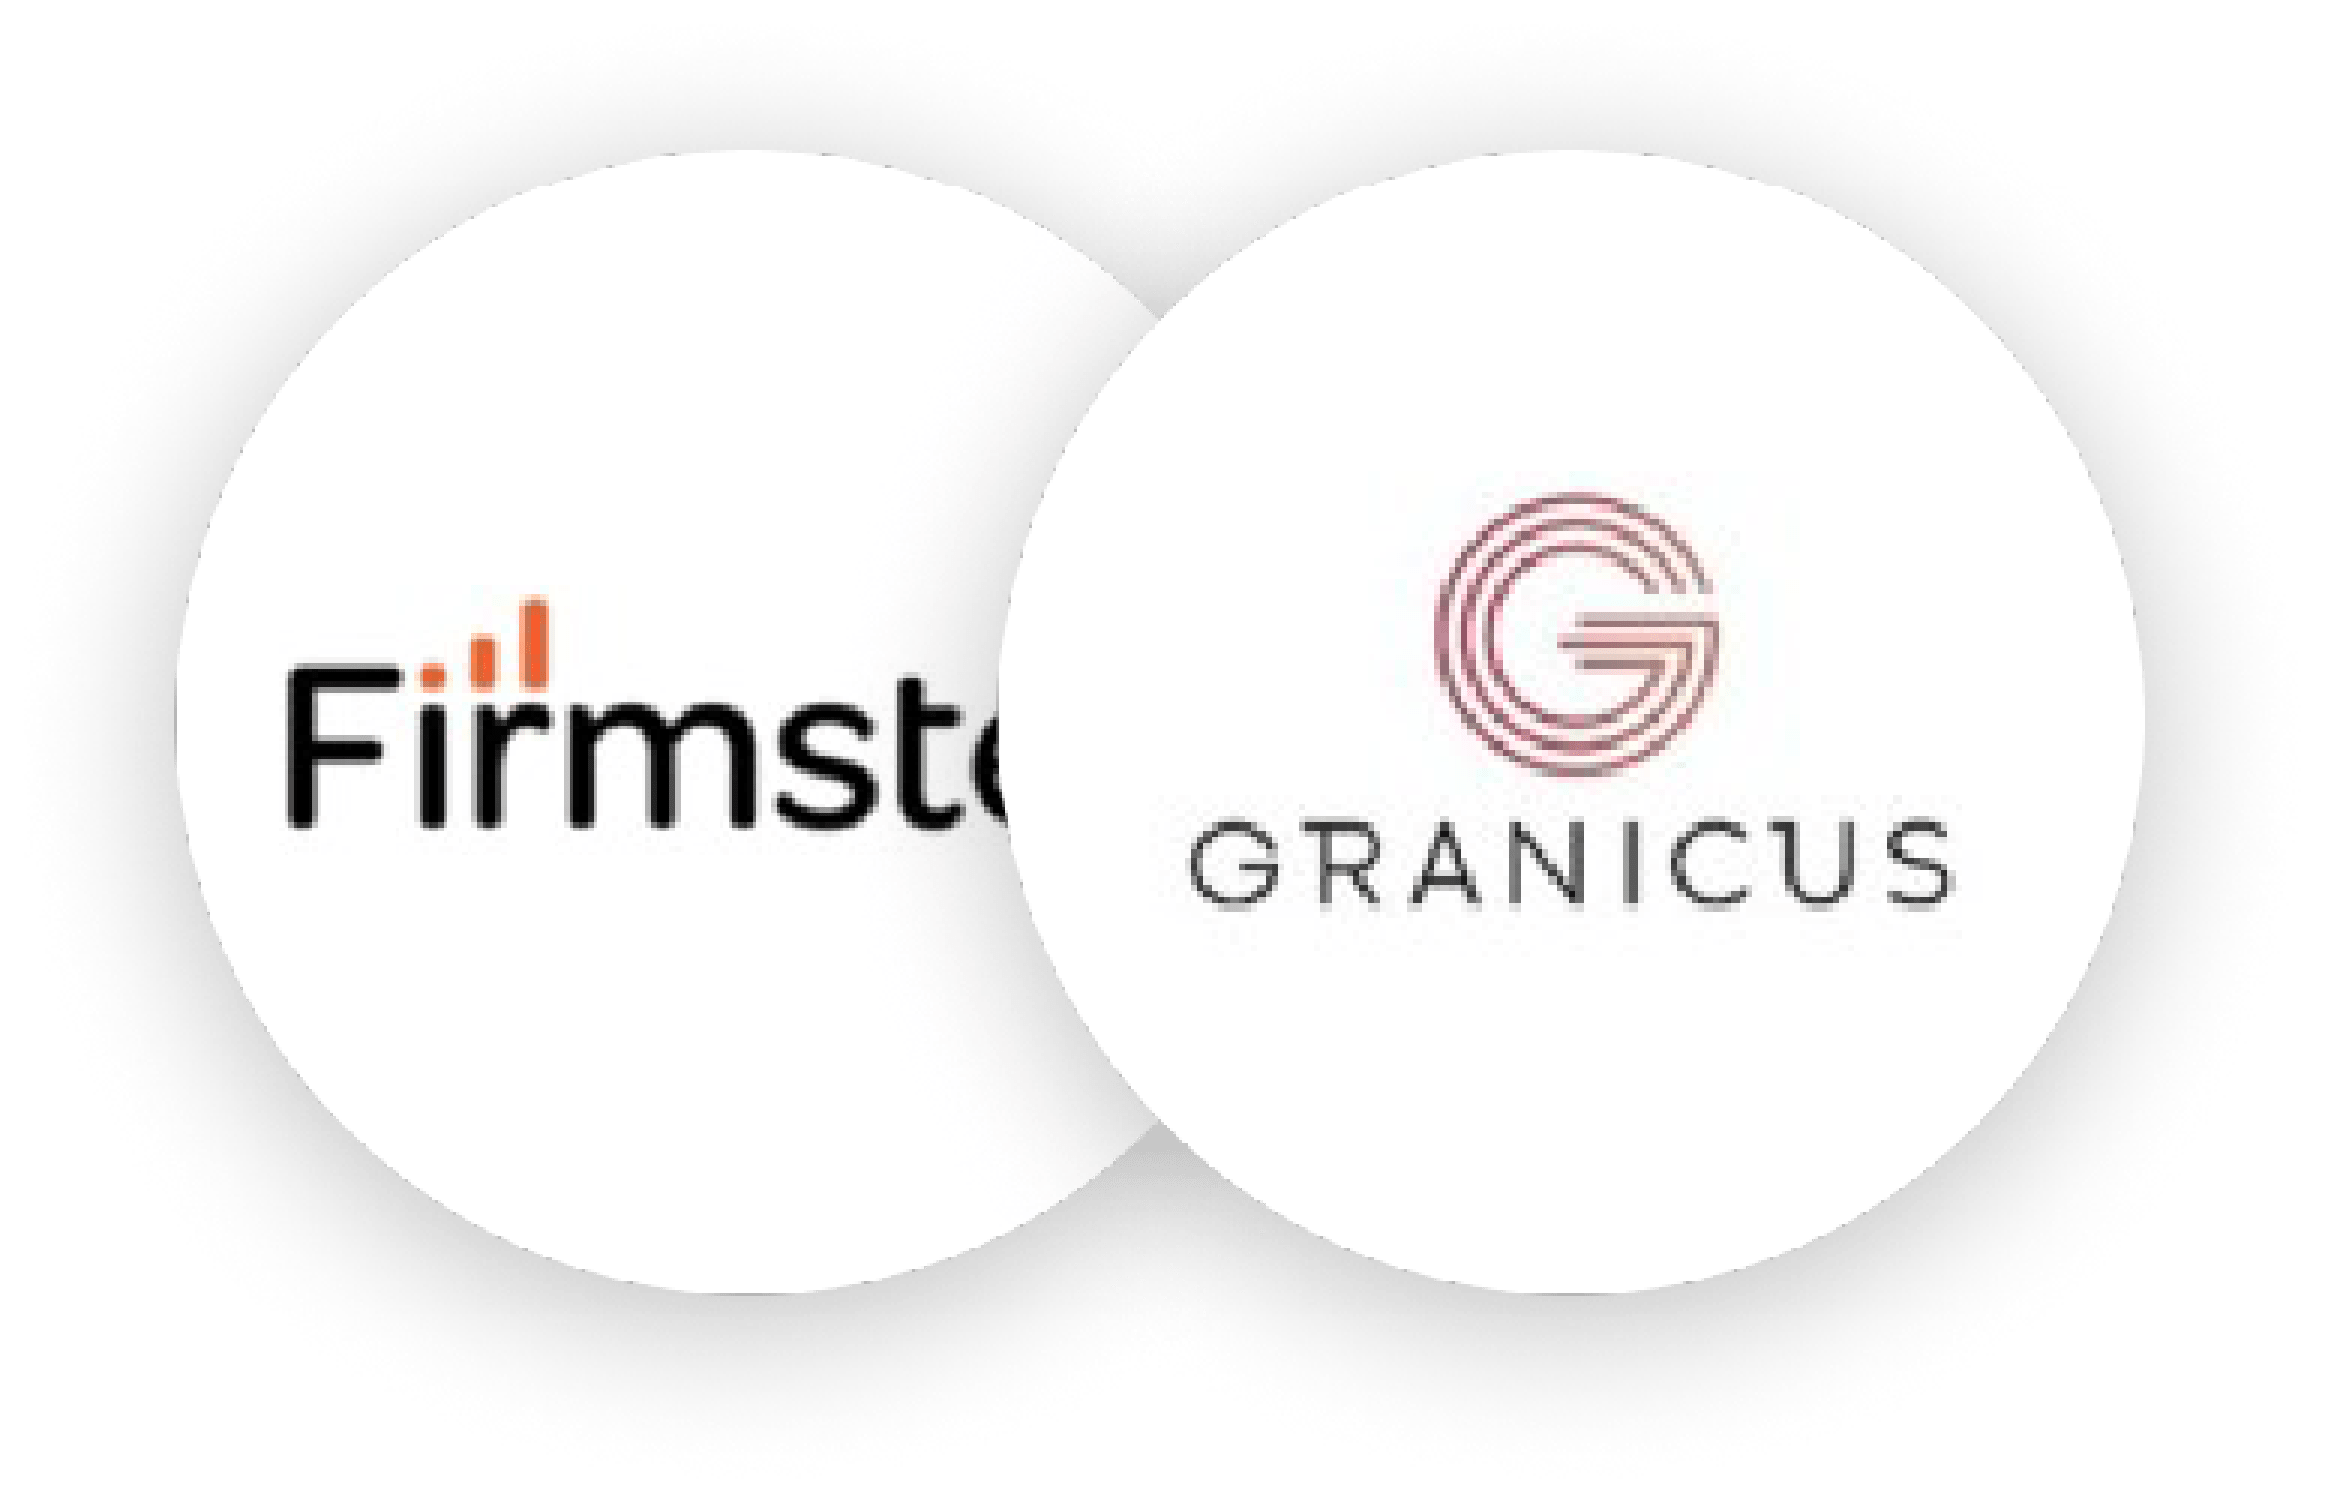 Completed M&A Deals - Firmstep Acquired By Granicus